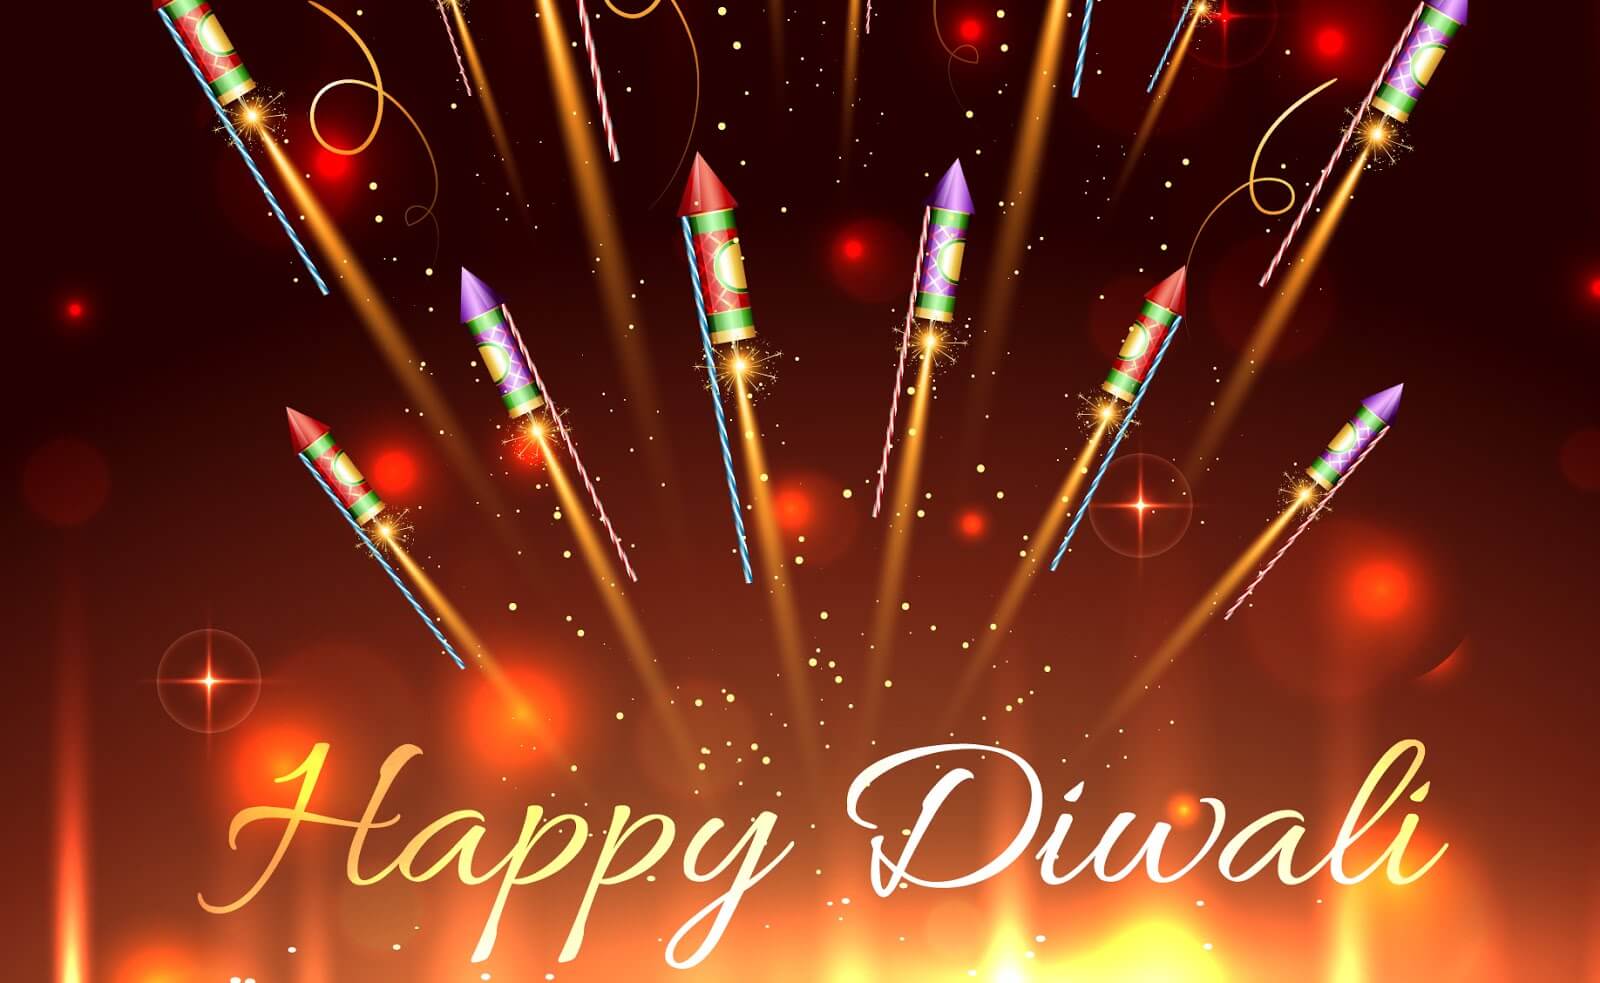 Happy Diwali Wishes And Messages - Happy Diwali Wishes Video - HD Wallpaper 